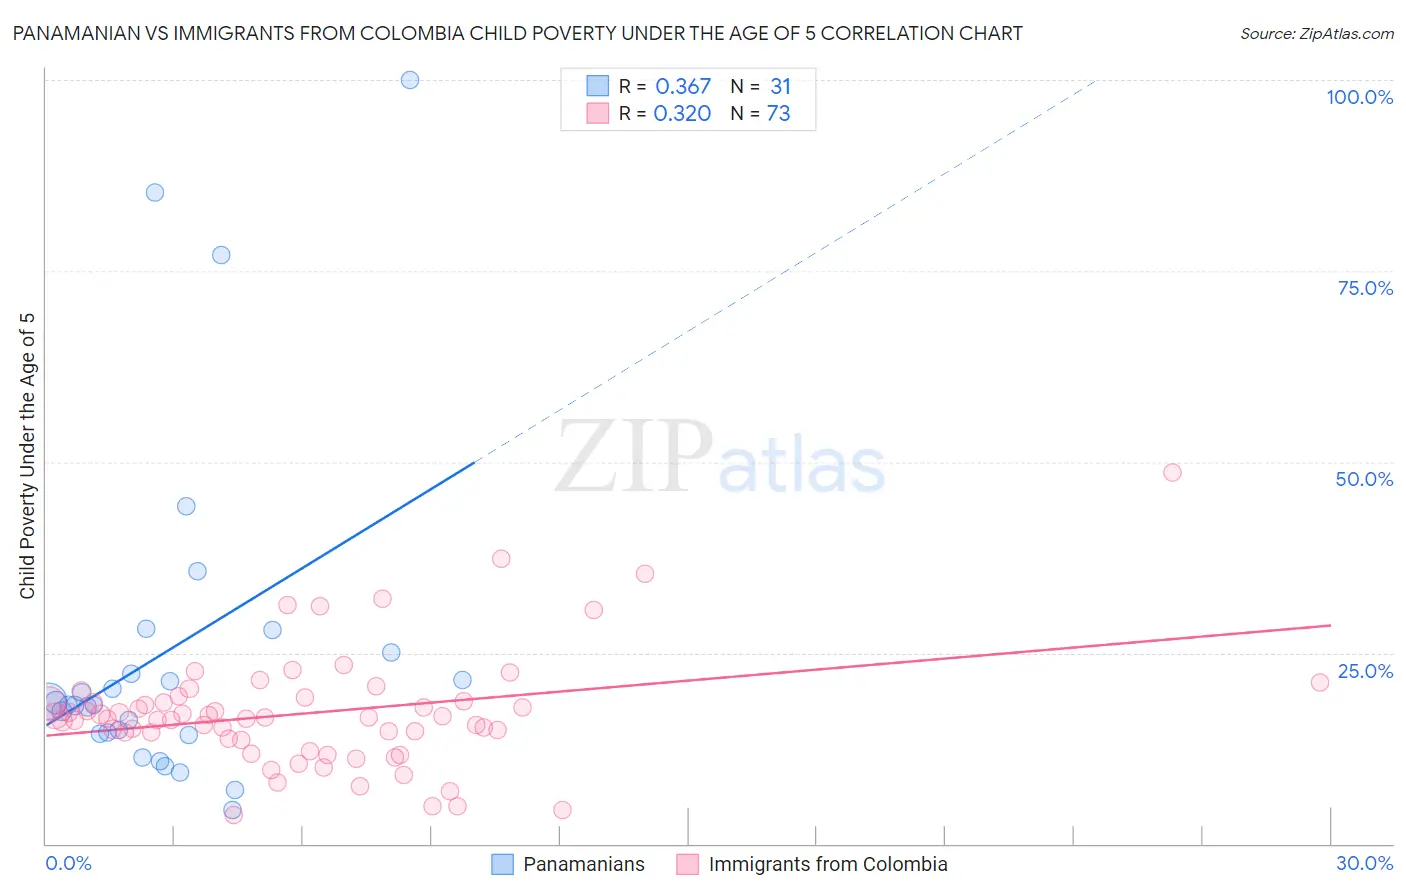 Panamanian vs Immigrants from Colombia Child Poverty Under the Age of 5